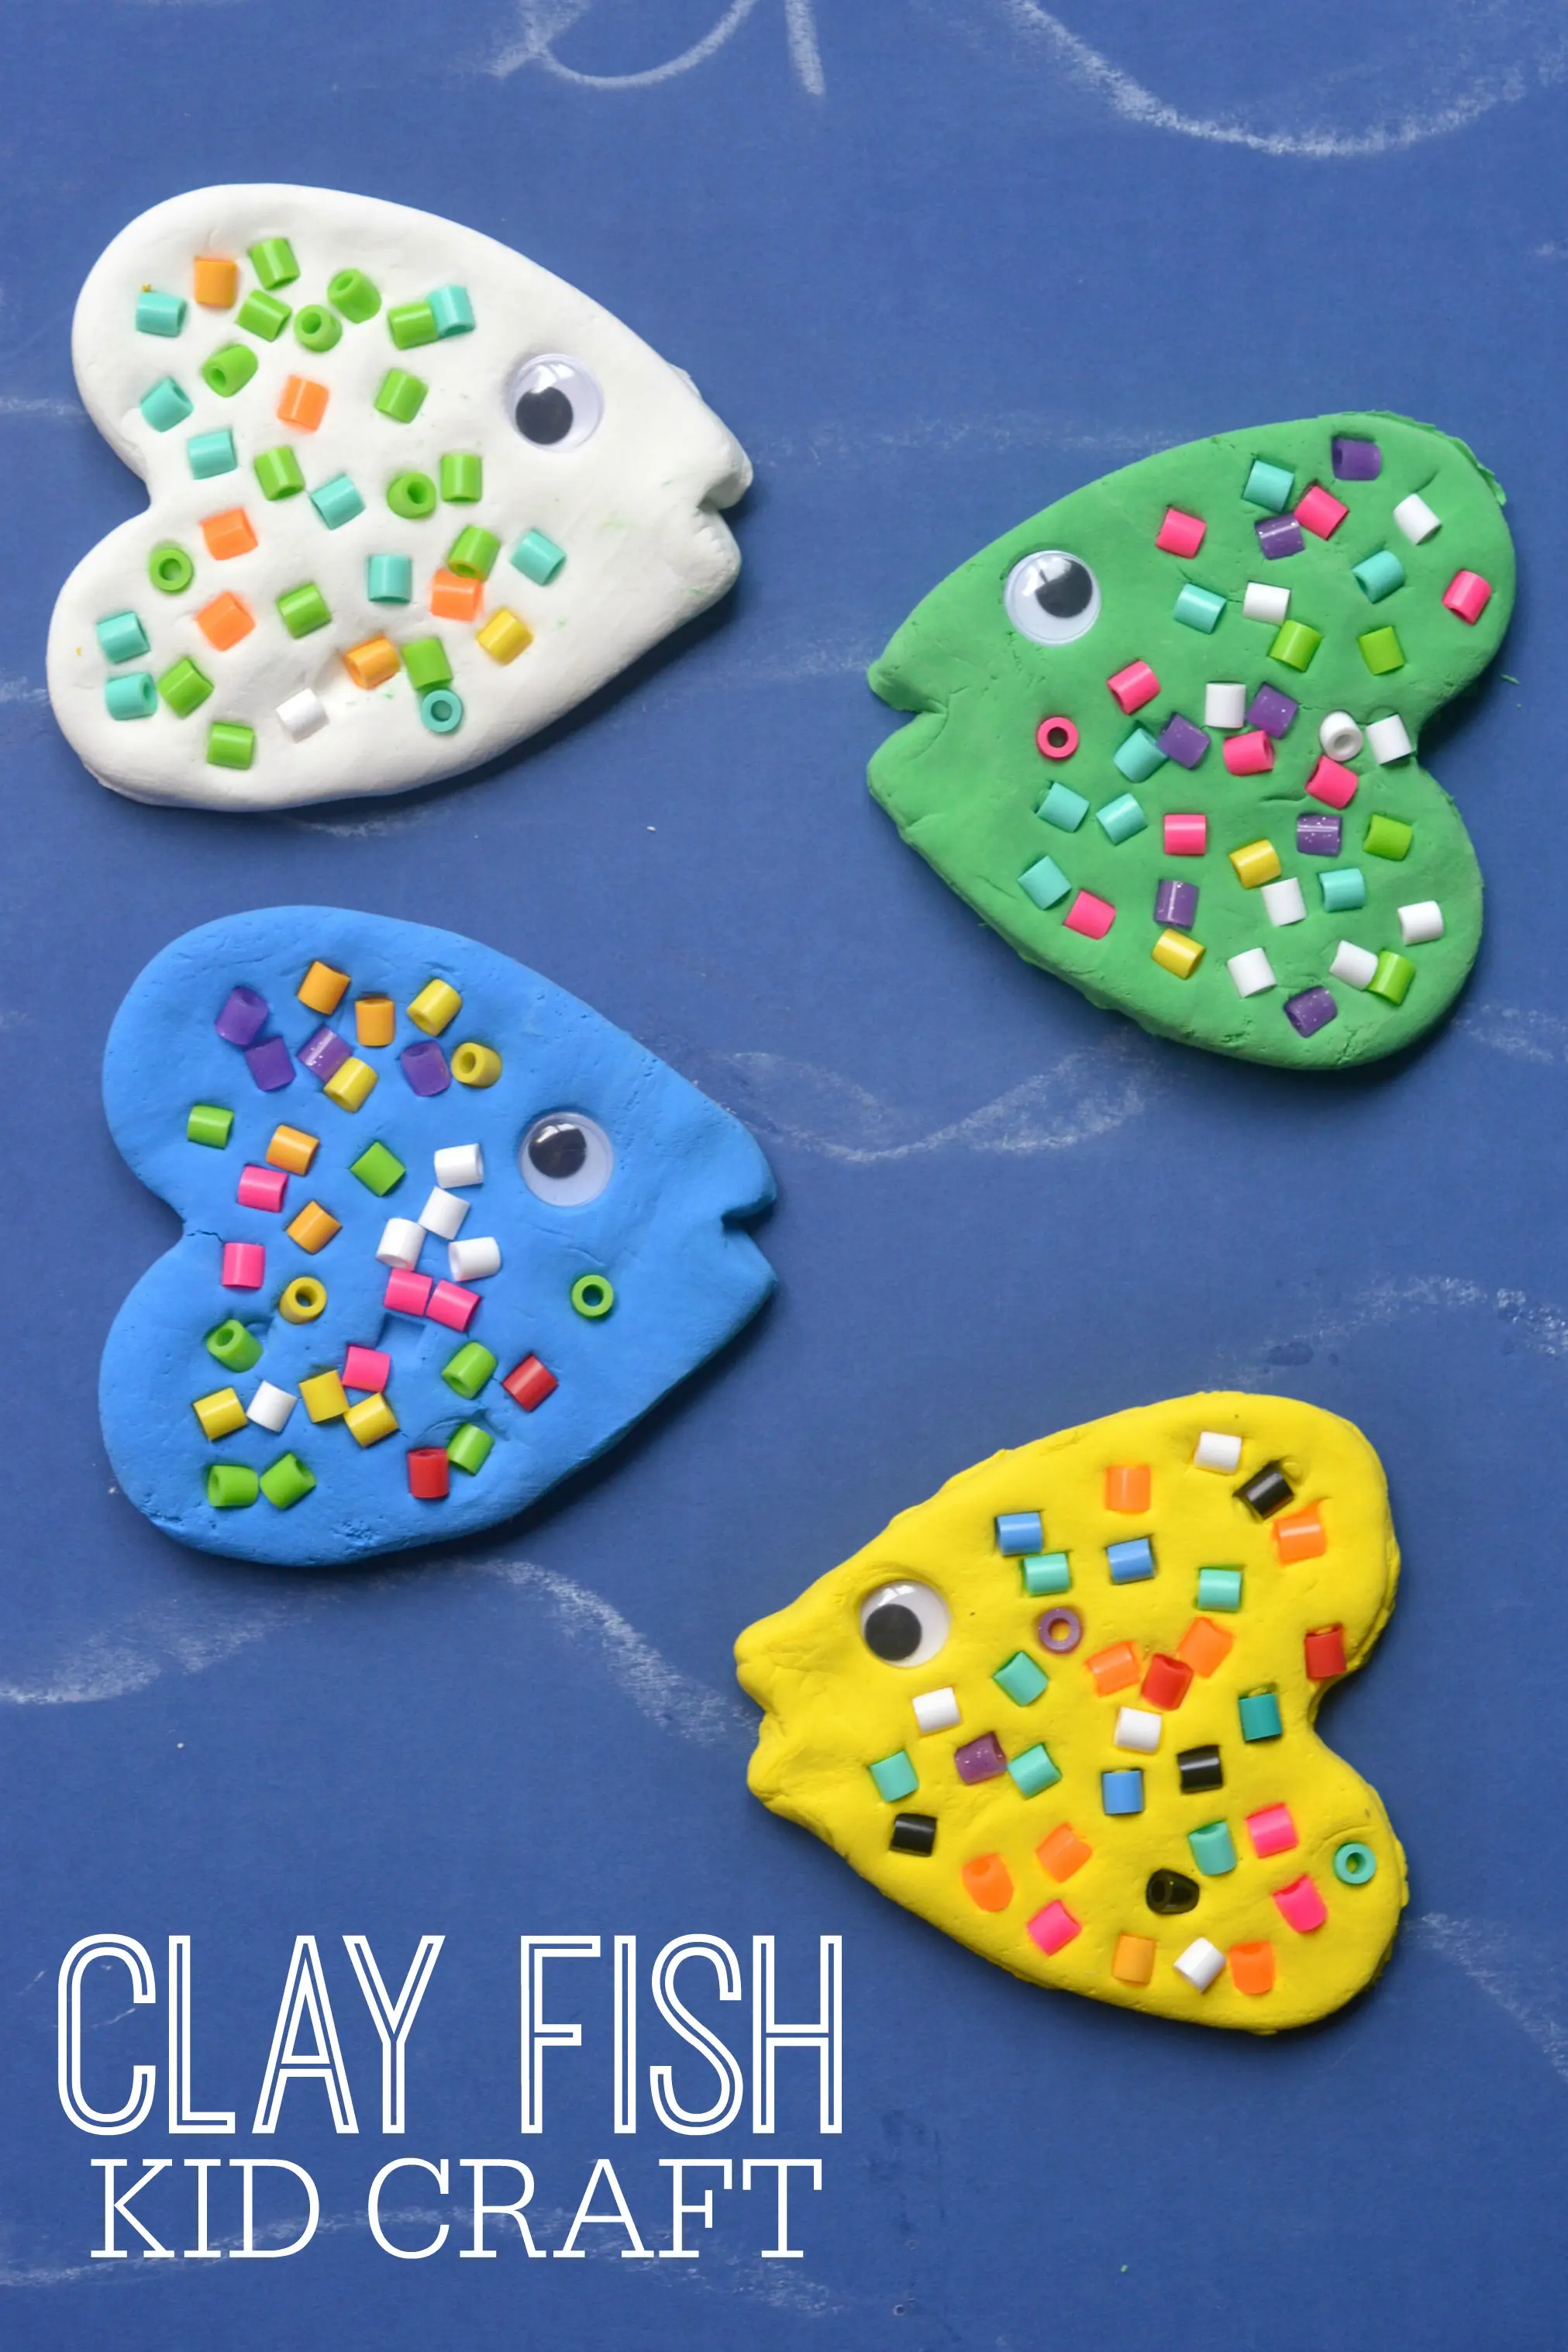 DIY clay fish craft for kids